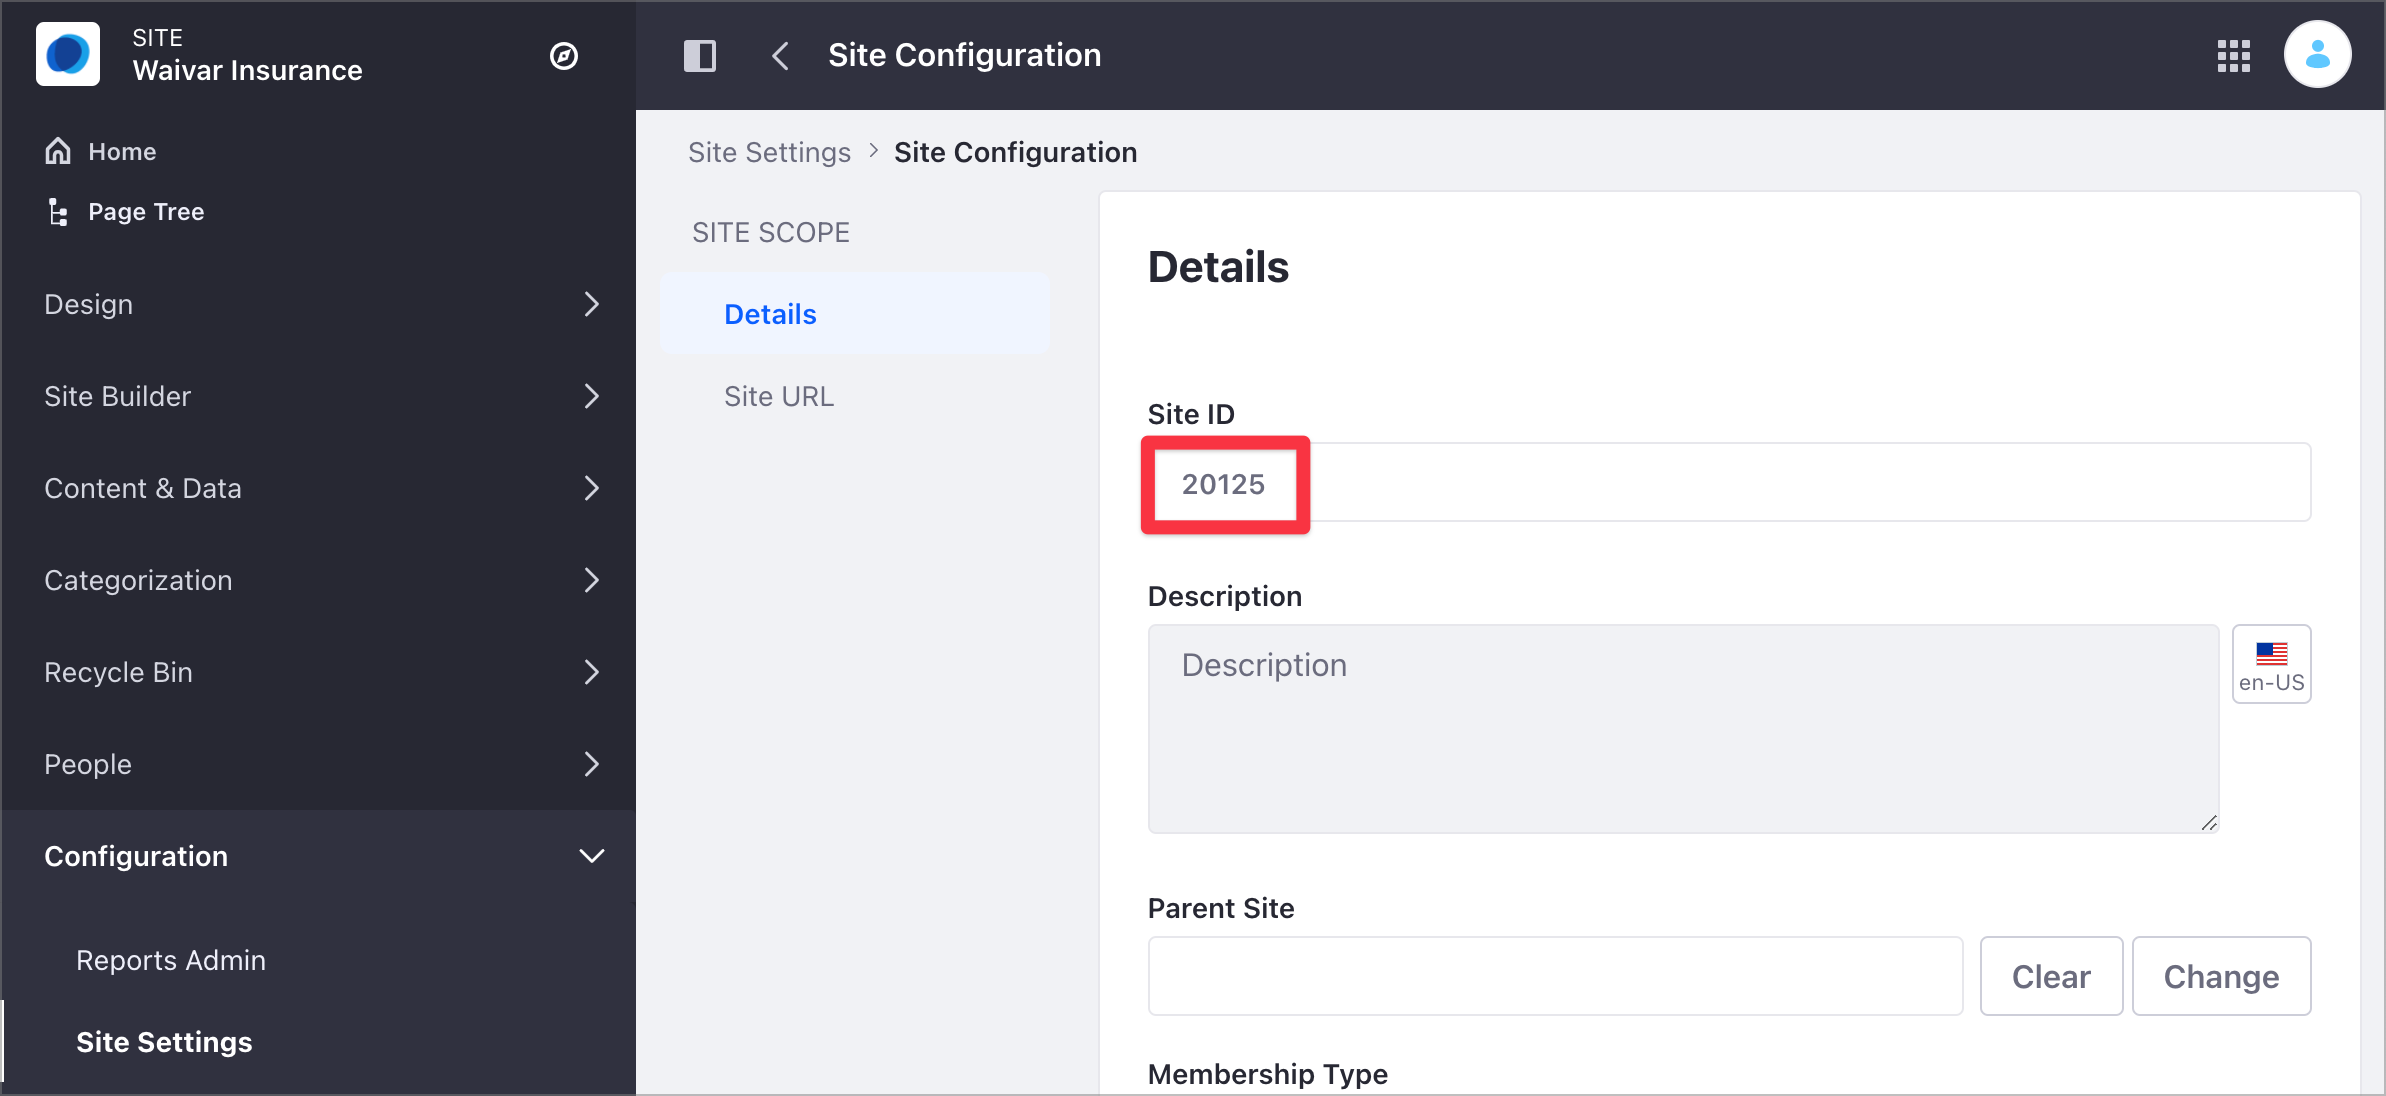 Identify the Site Id under the Site Settings and Site Configuration option.